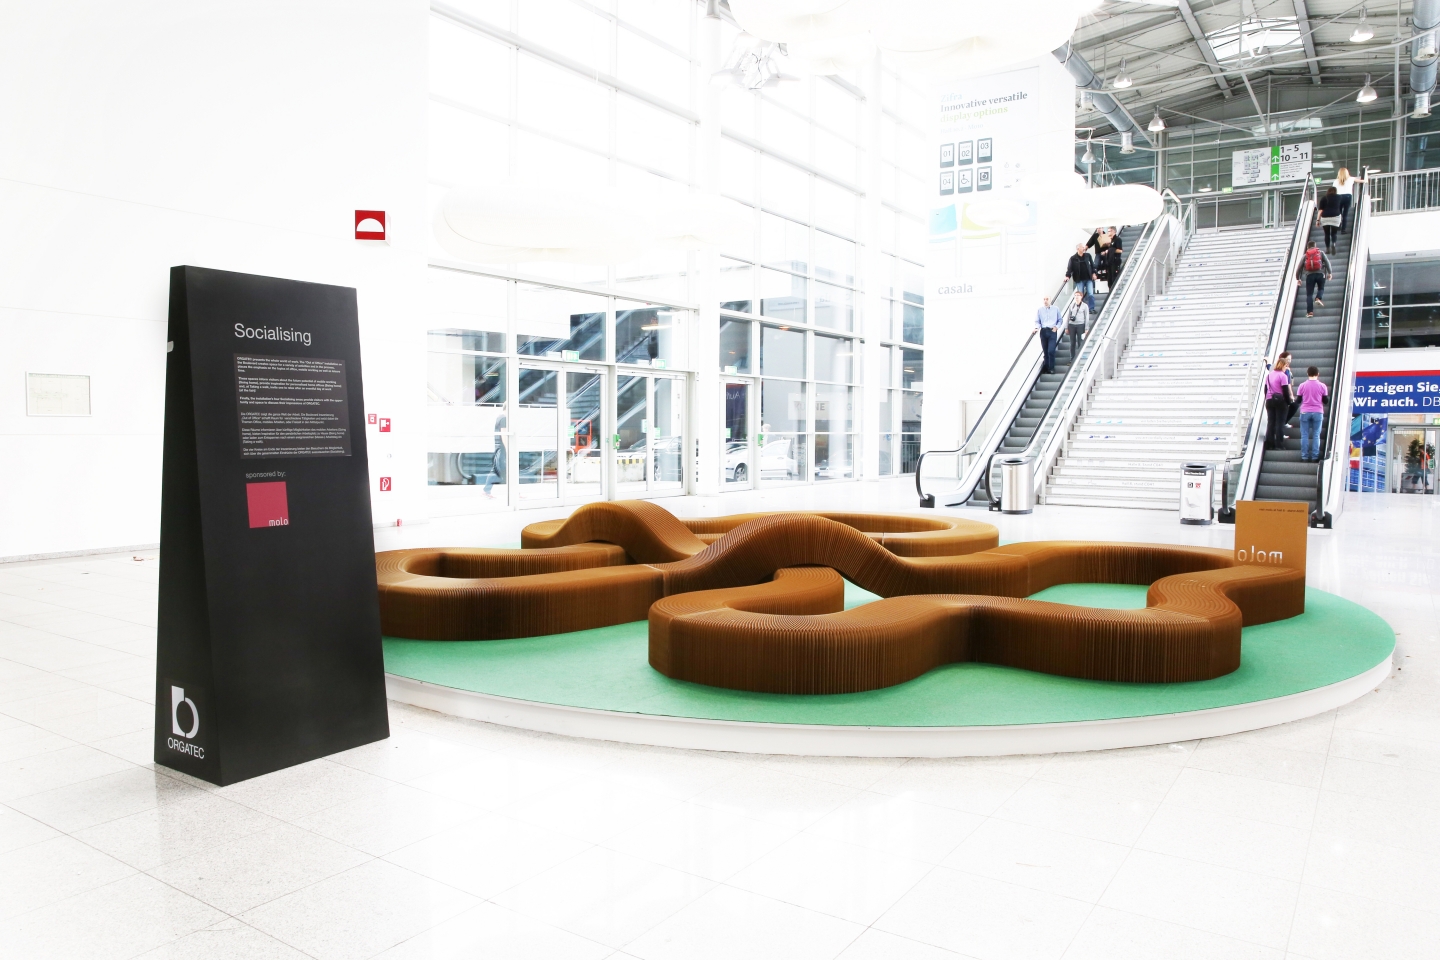 paper bench / furniture by molo - a serpentine bench made from softseating set up in the central foyer of Orgatec